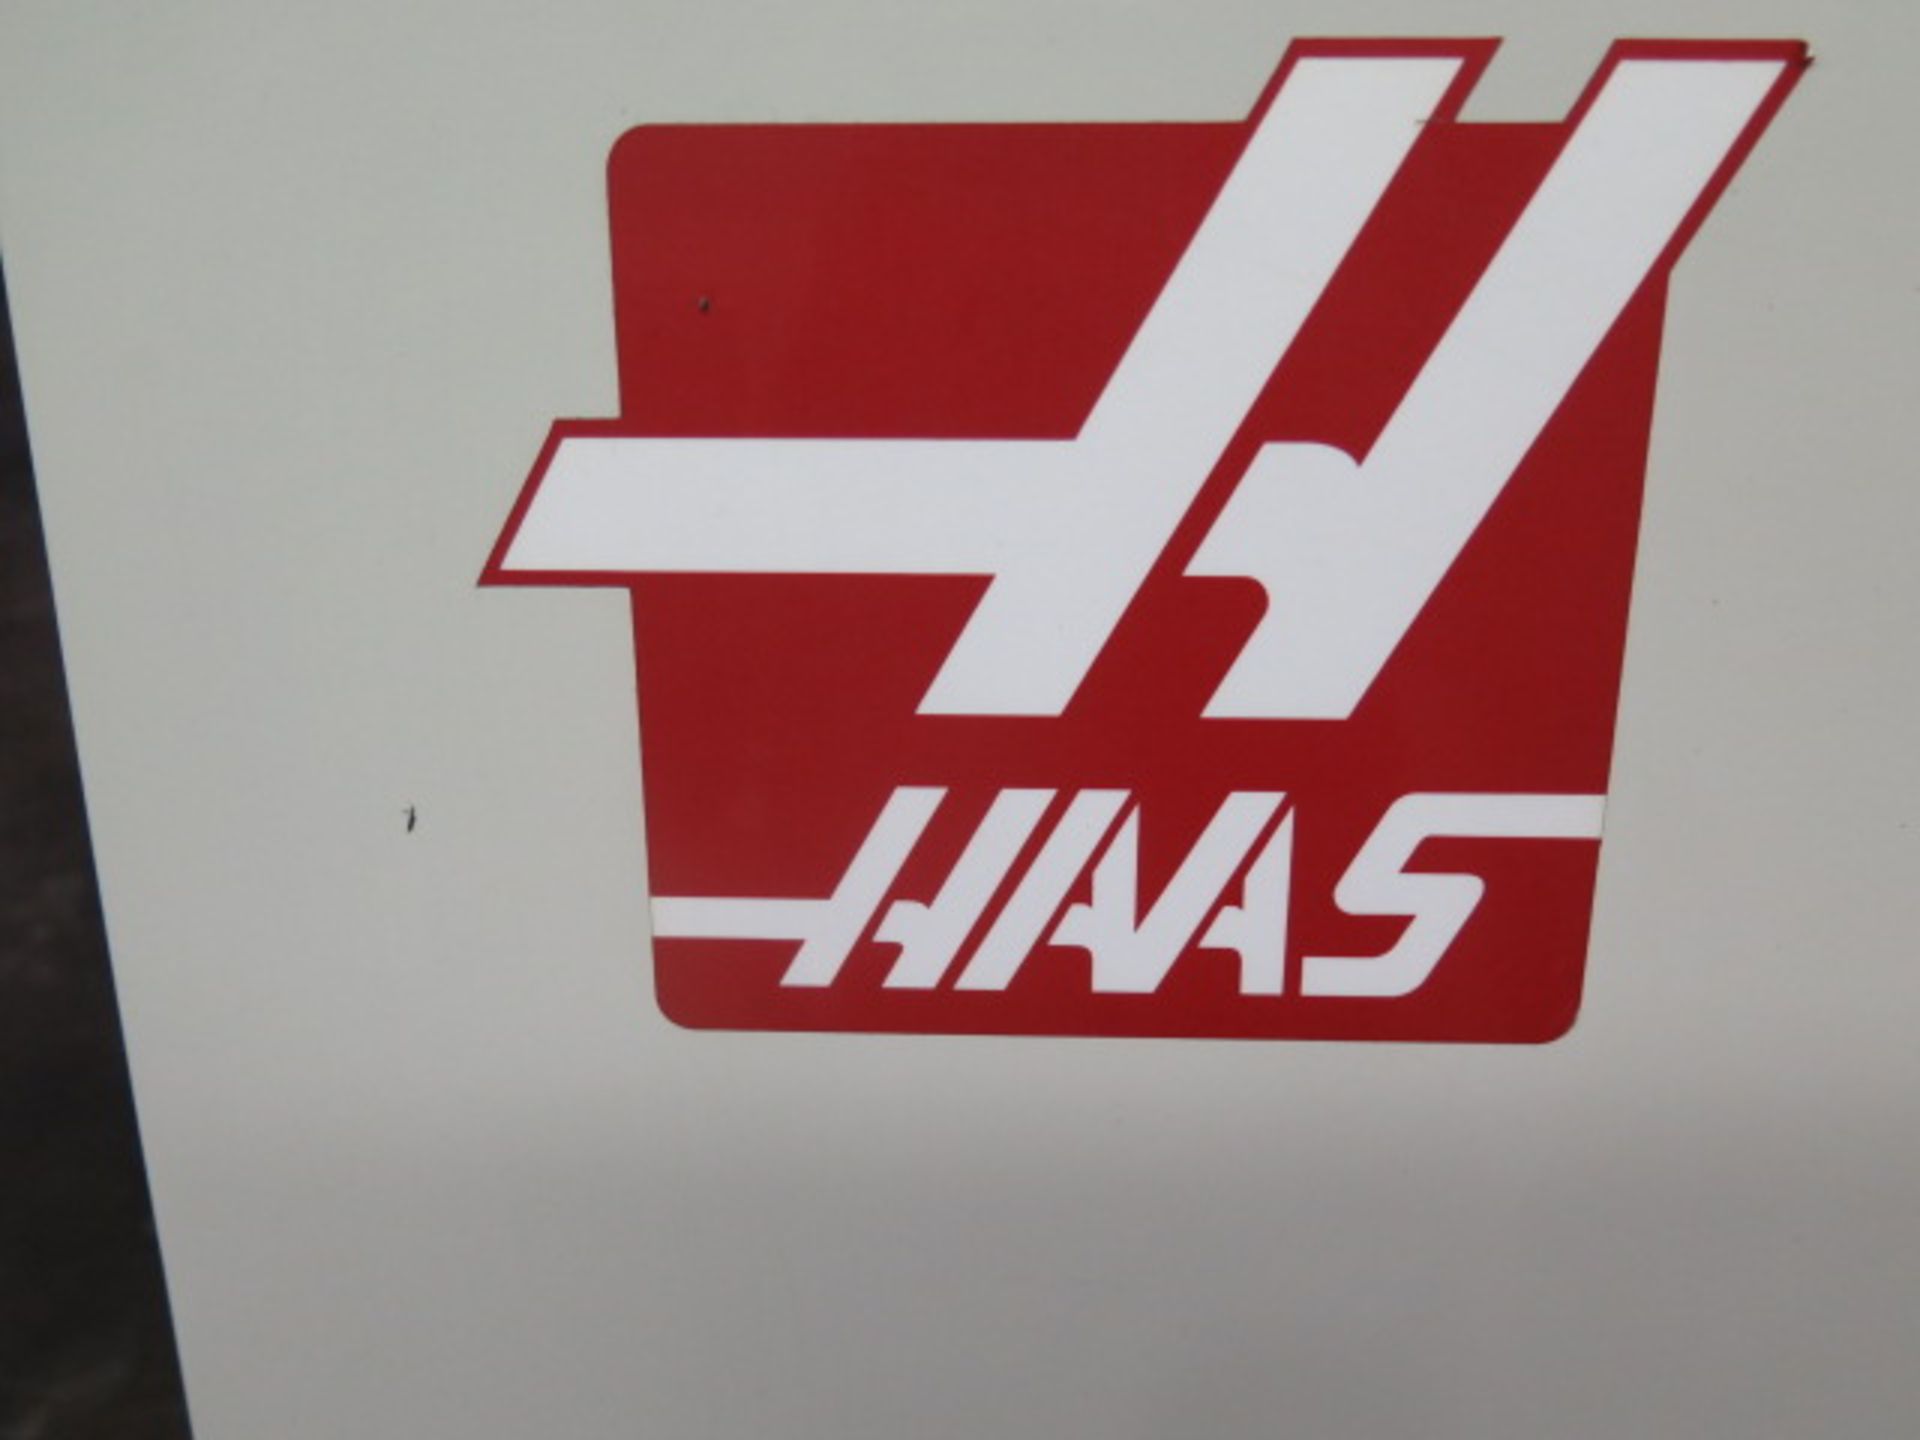 Haas Servobar 300 Automatic Bar Loader / Feeder s/n 91279 (SOLD AS-IS - NO WARRANTY) - Image 4 of 9